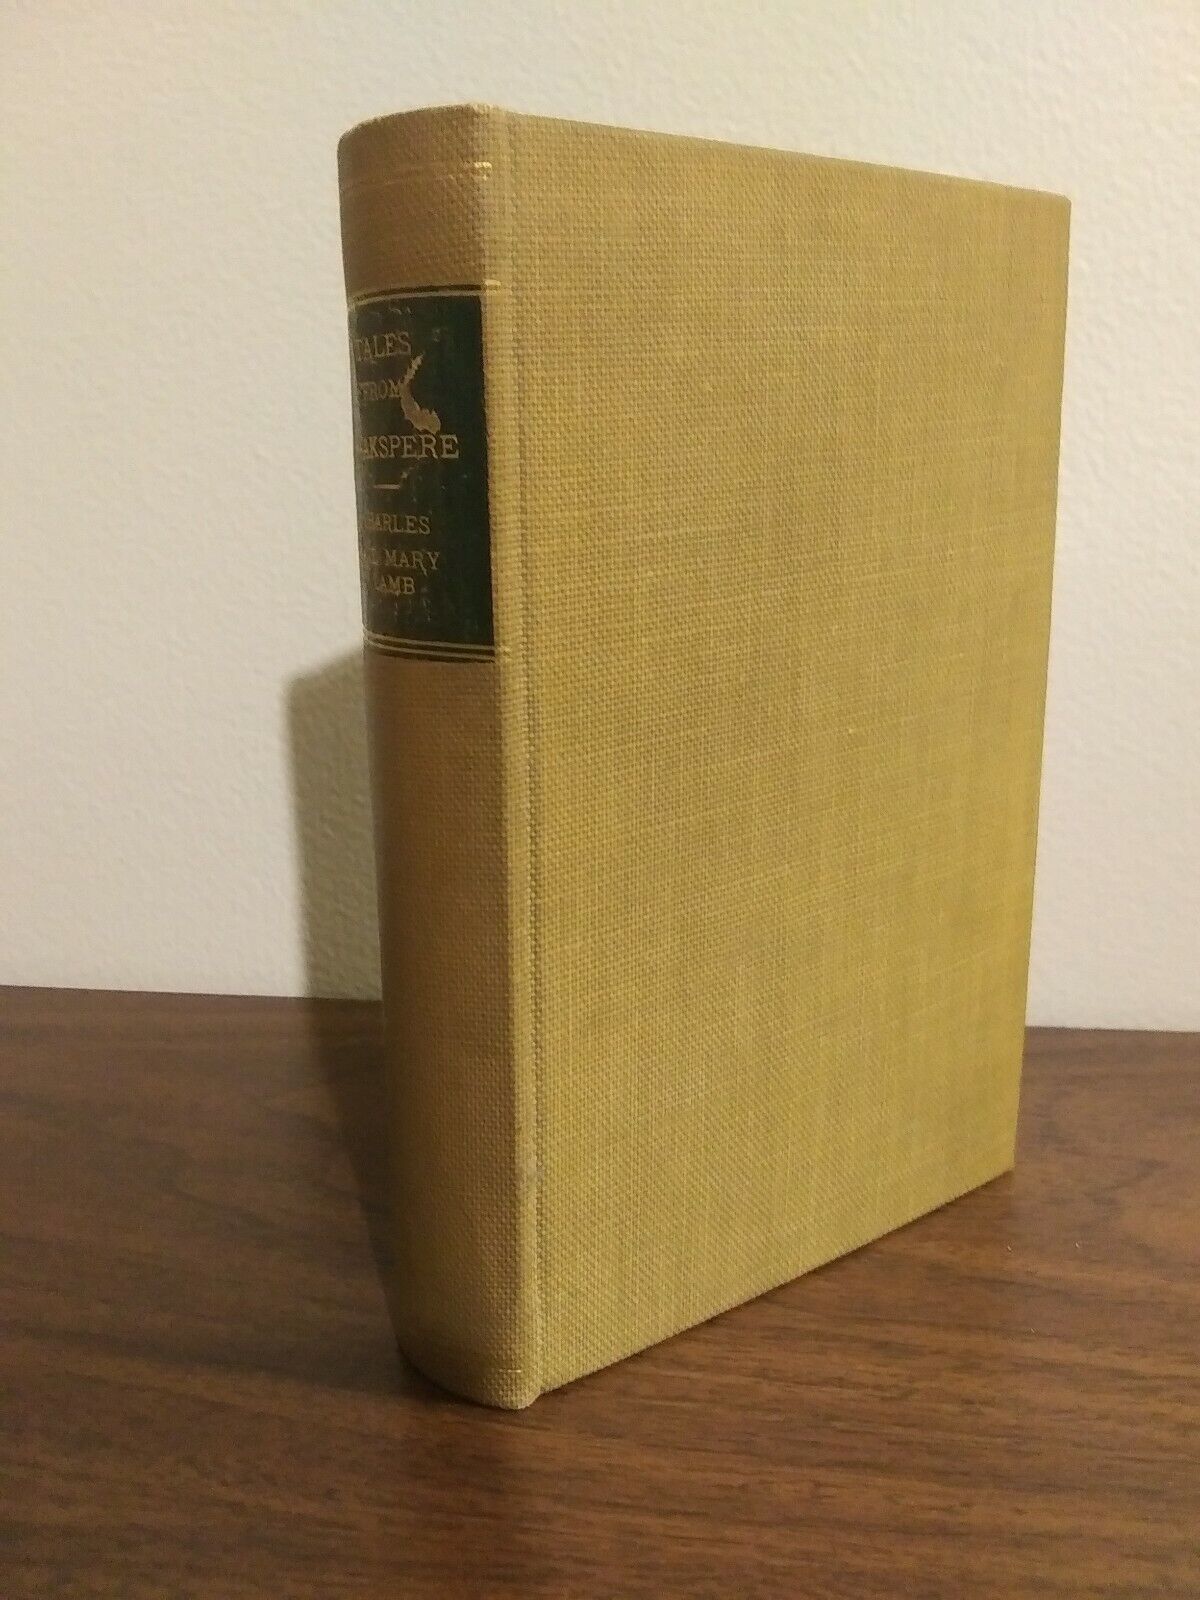 1849. Tales from Shakspere by Charles and Mary Lamb. First Edition